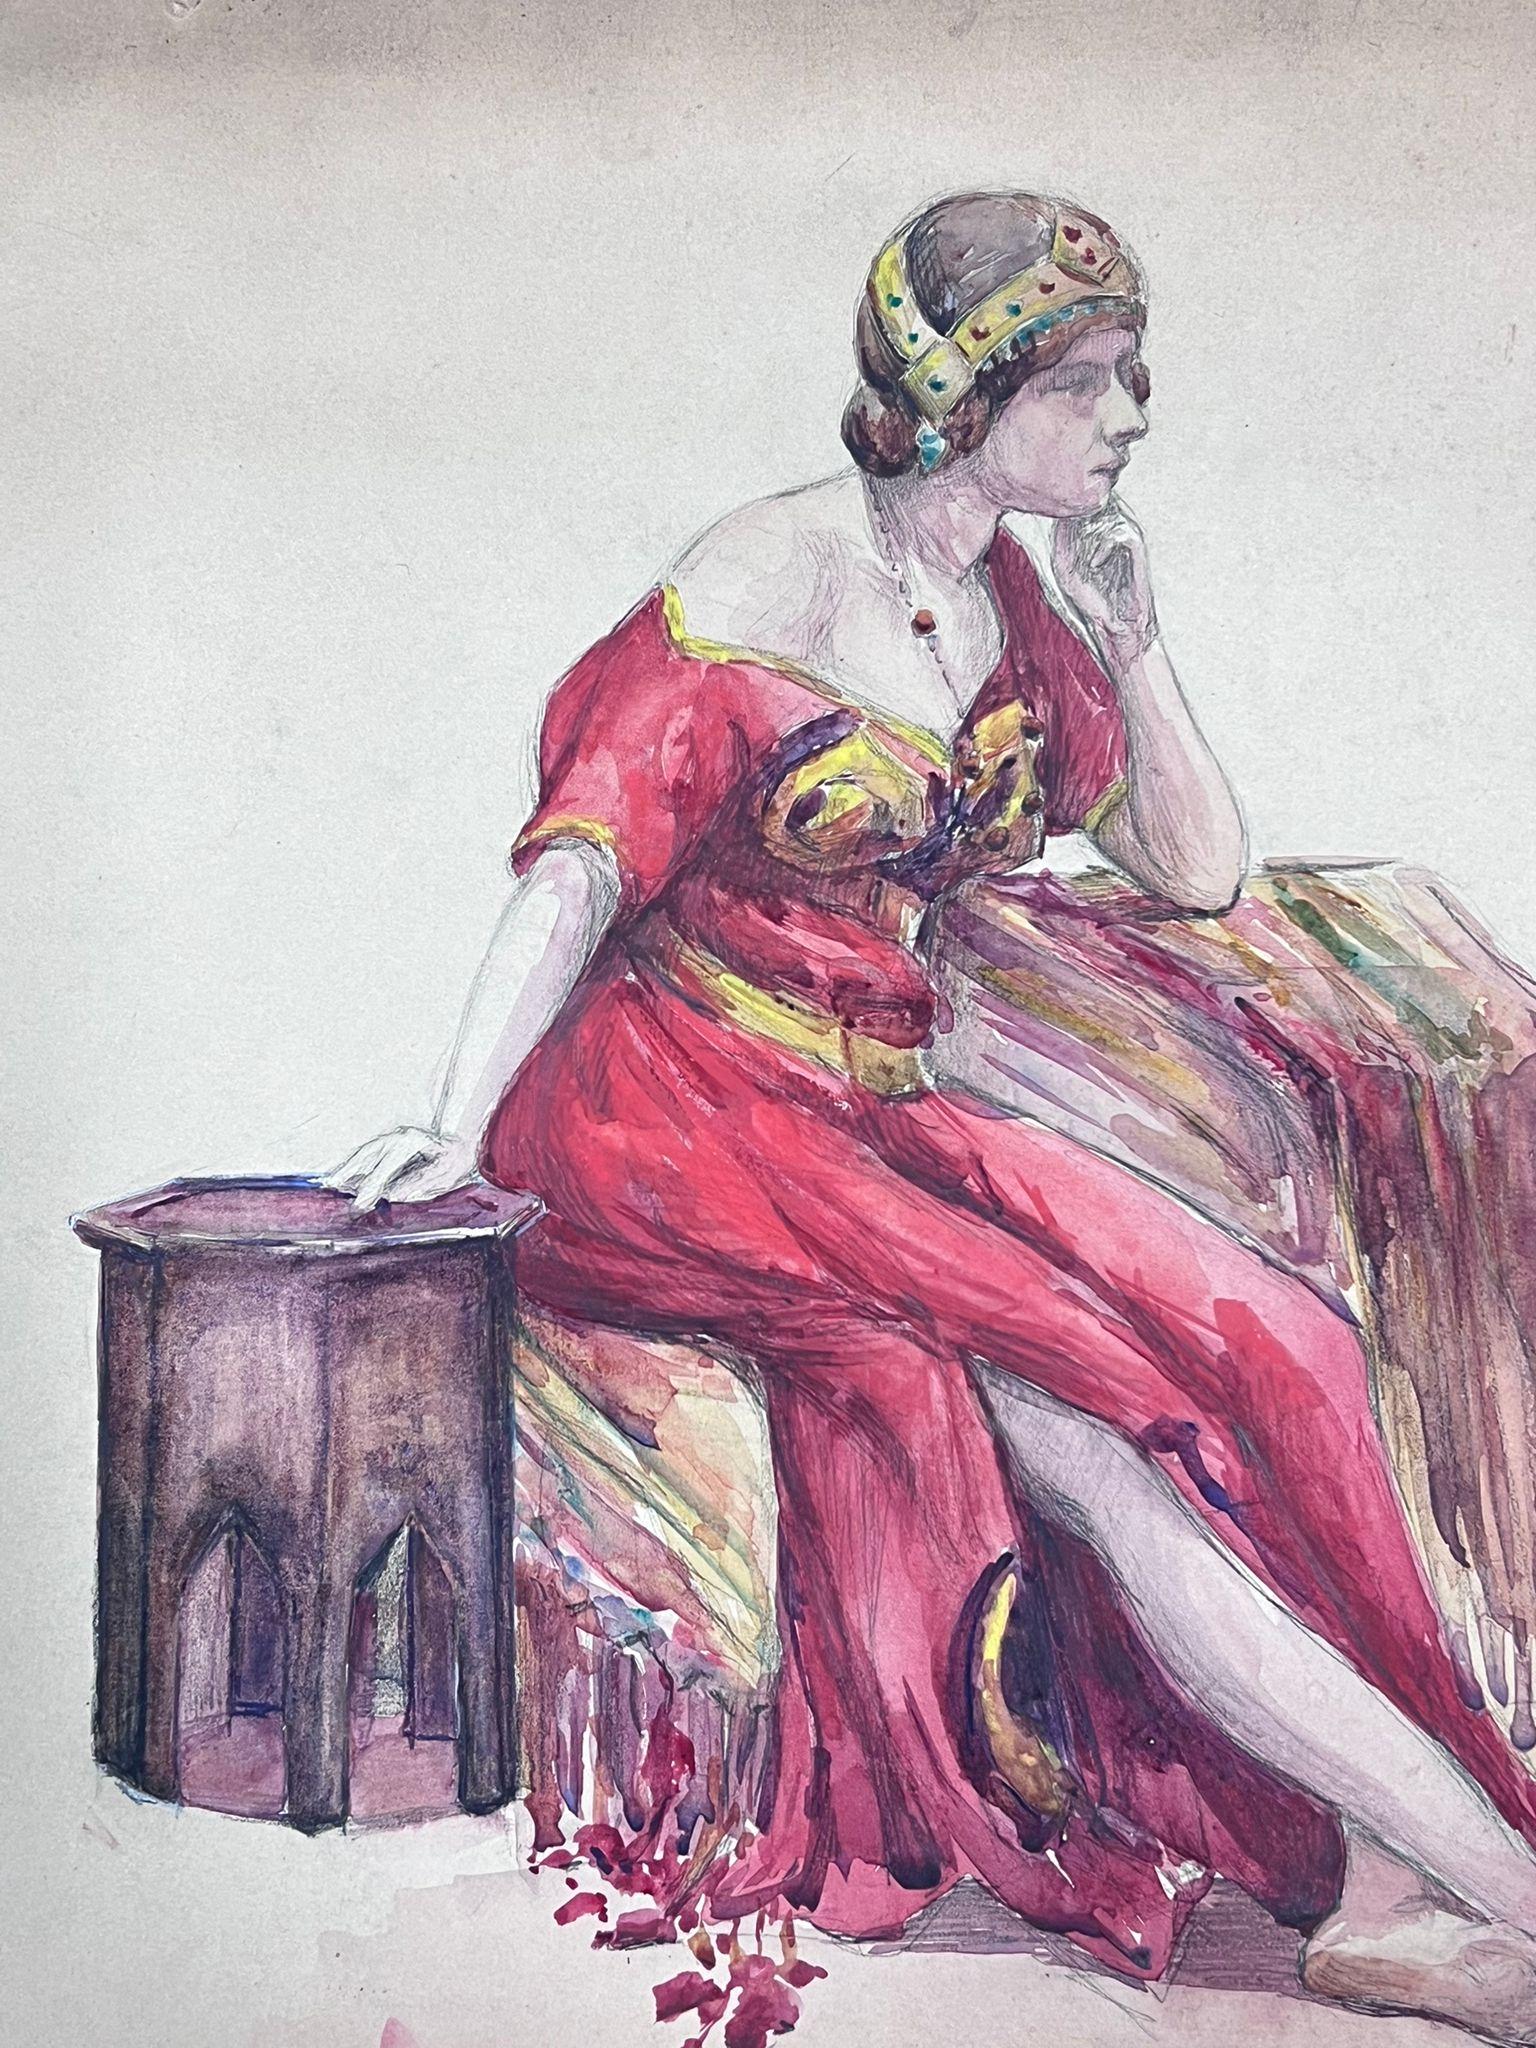 Lady In Red
by Louise Alix (French, 1888-1980) *see notes below
provenance stamp to the back 
watercolour painting on artist paper, unframed
measures: 13.75 high by 13 inches wide
condition: overall very good and sound, a few scuffs and marks to the